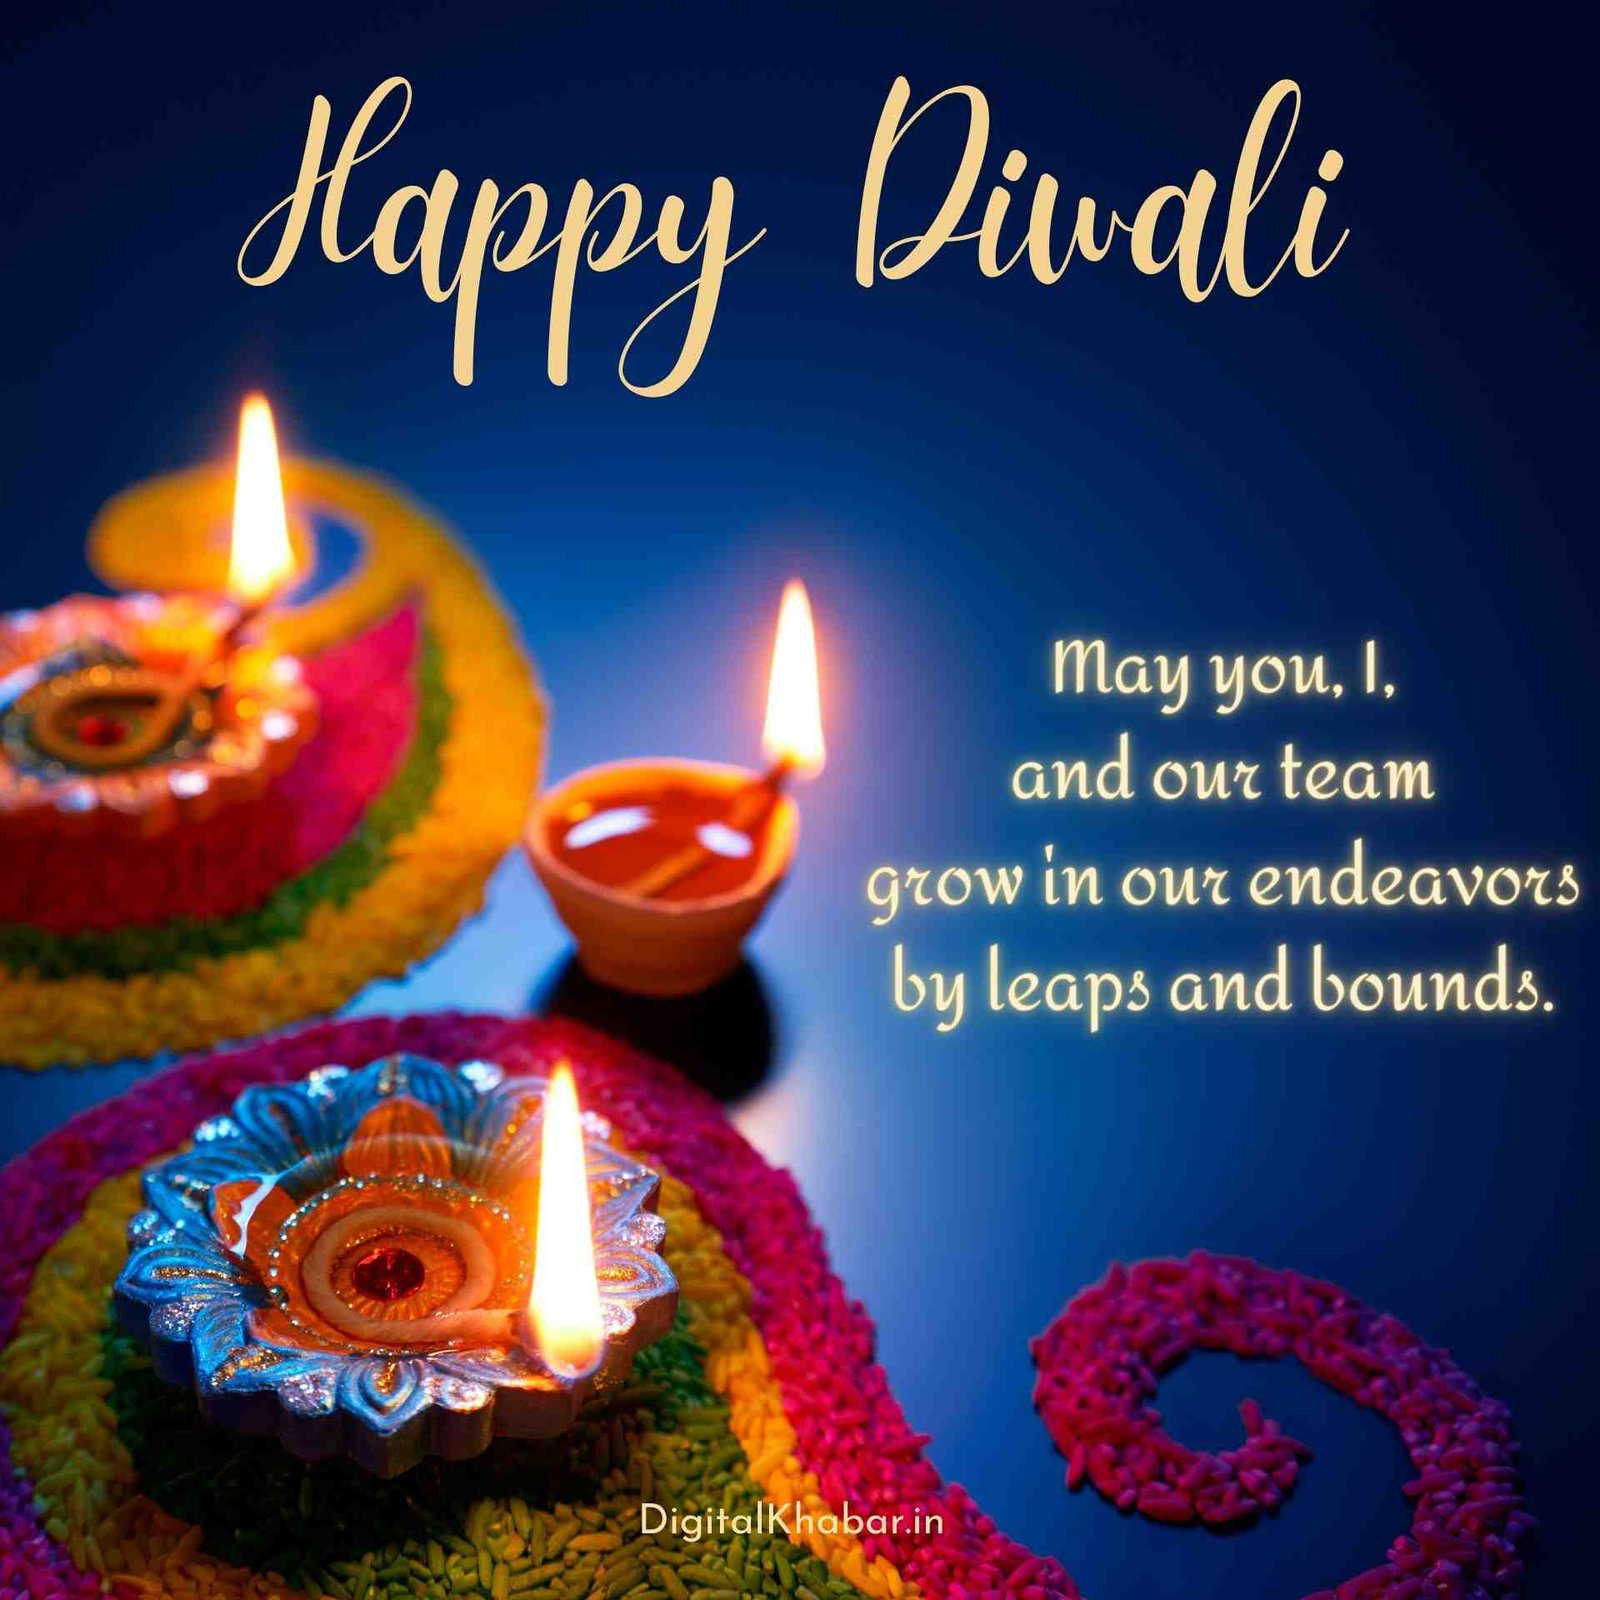 Happy Diwali Wishes and images